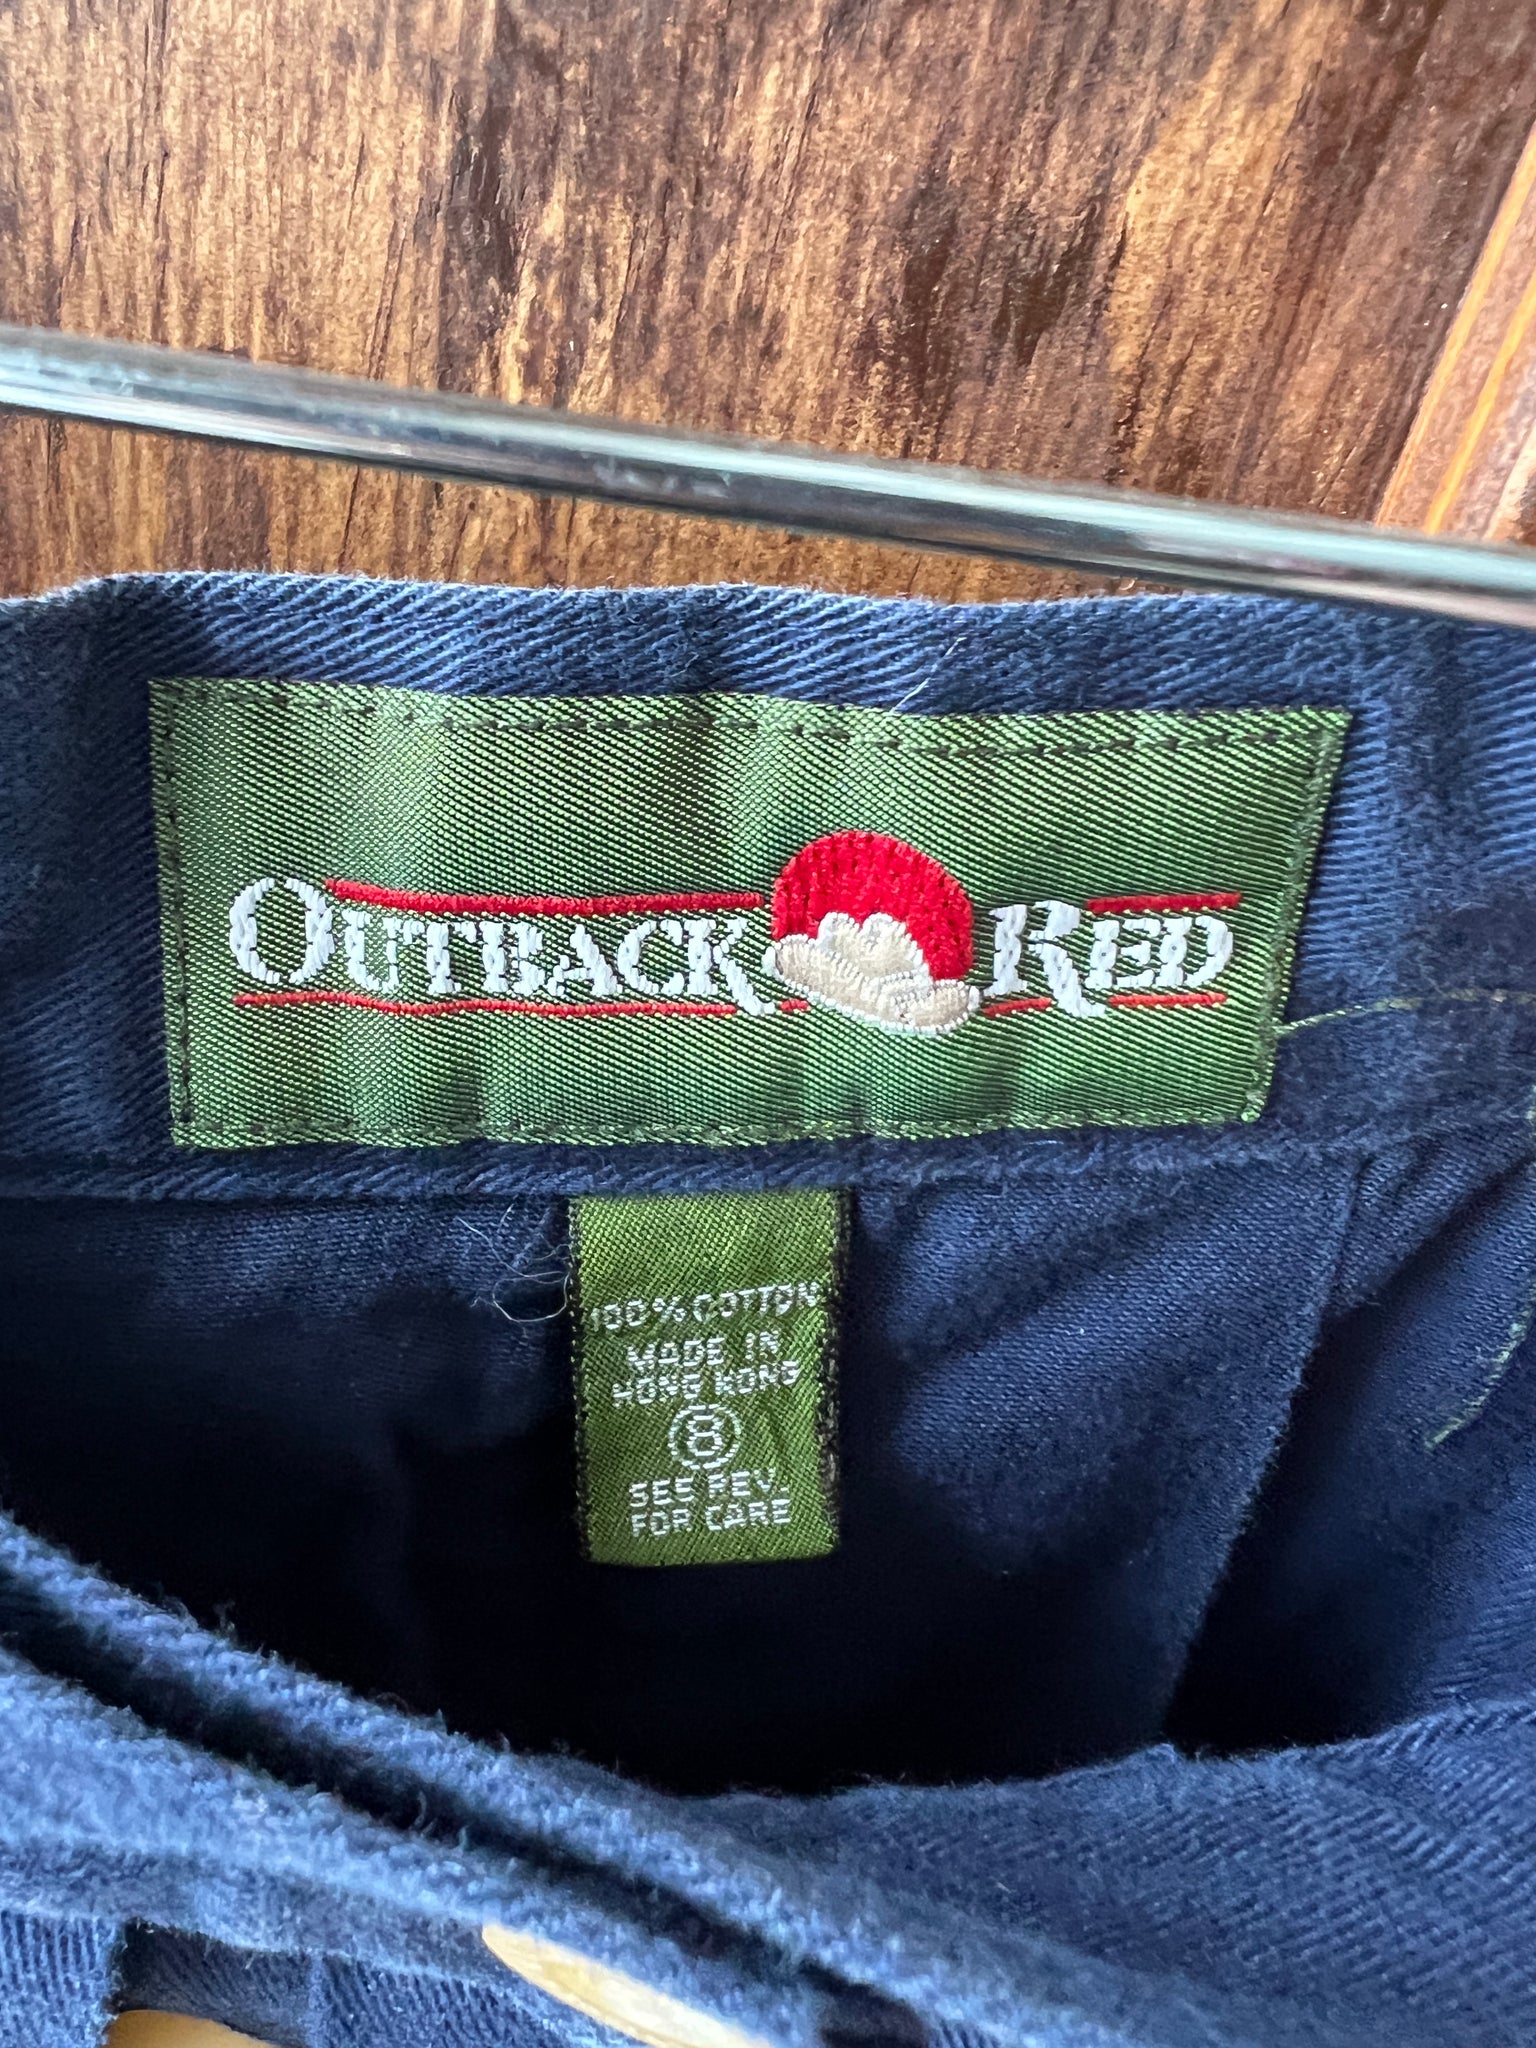 1990s SKIRT- Outback Red navy midi w/ buttons